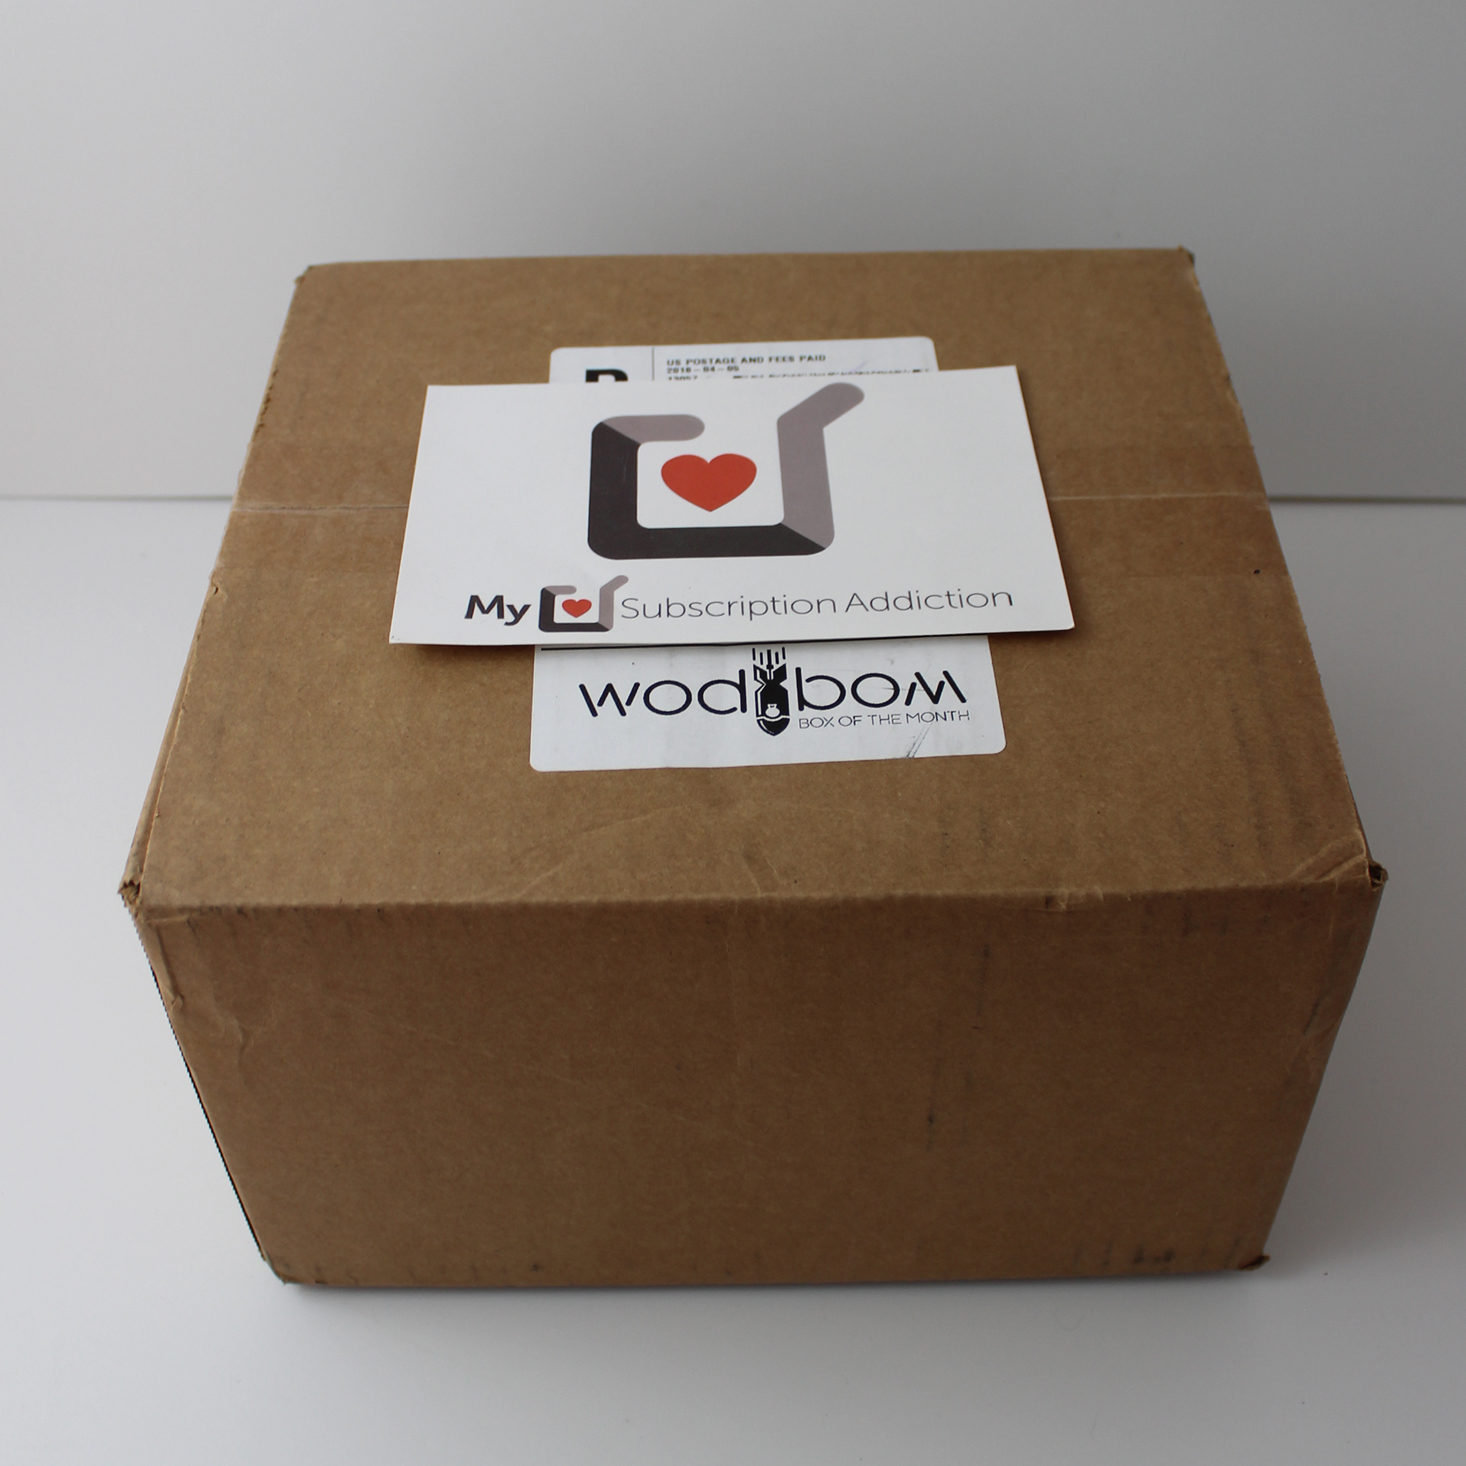 WODBOM Fitness Subscription Review + Coupon – April 2018